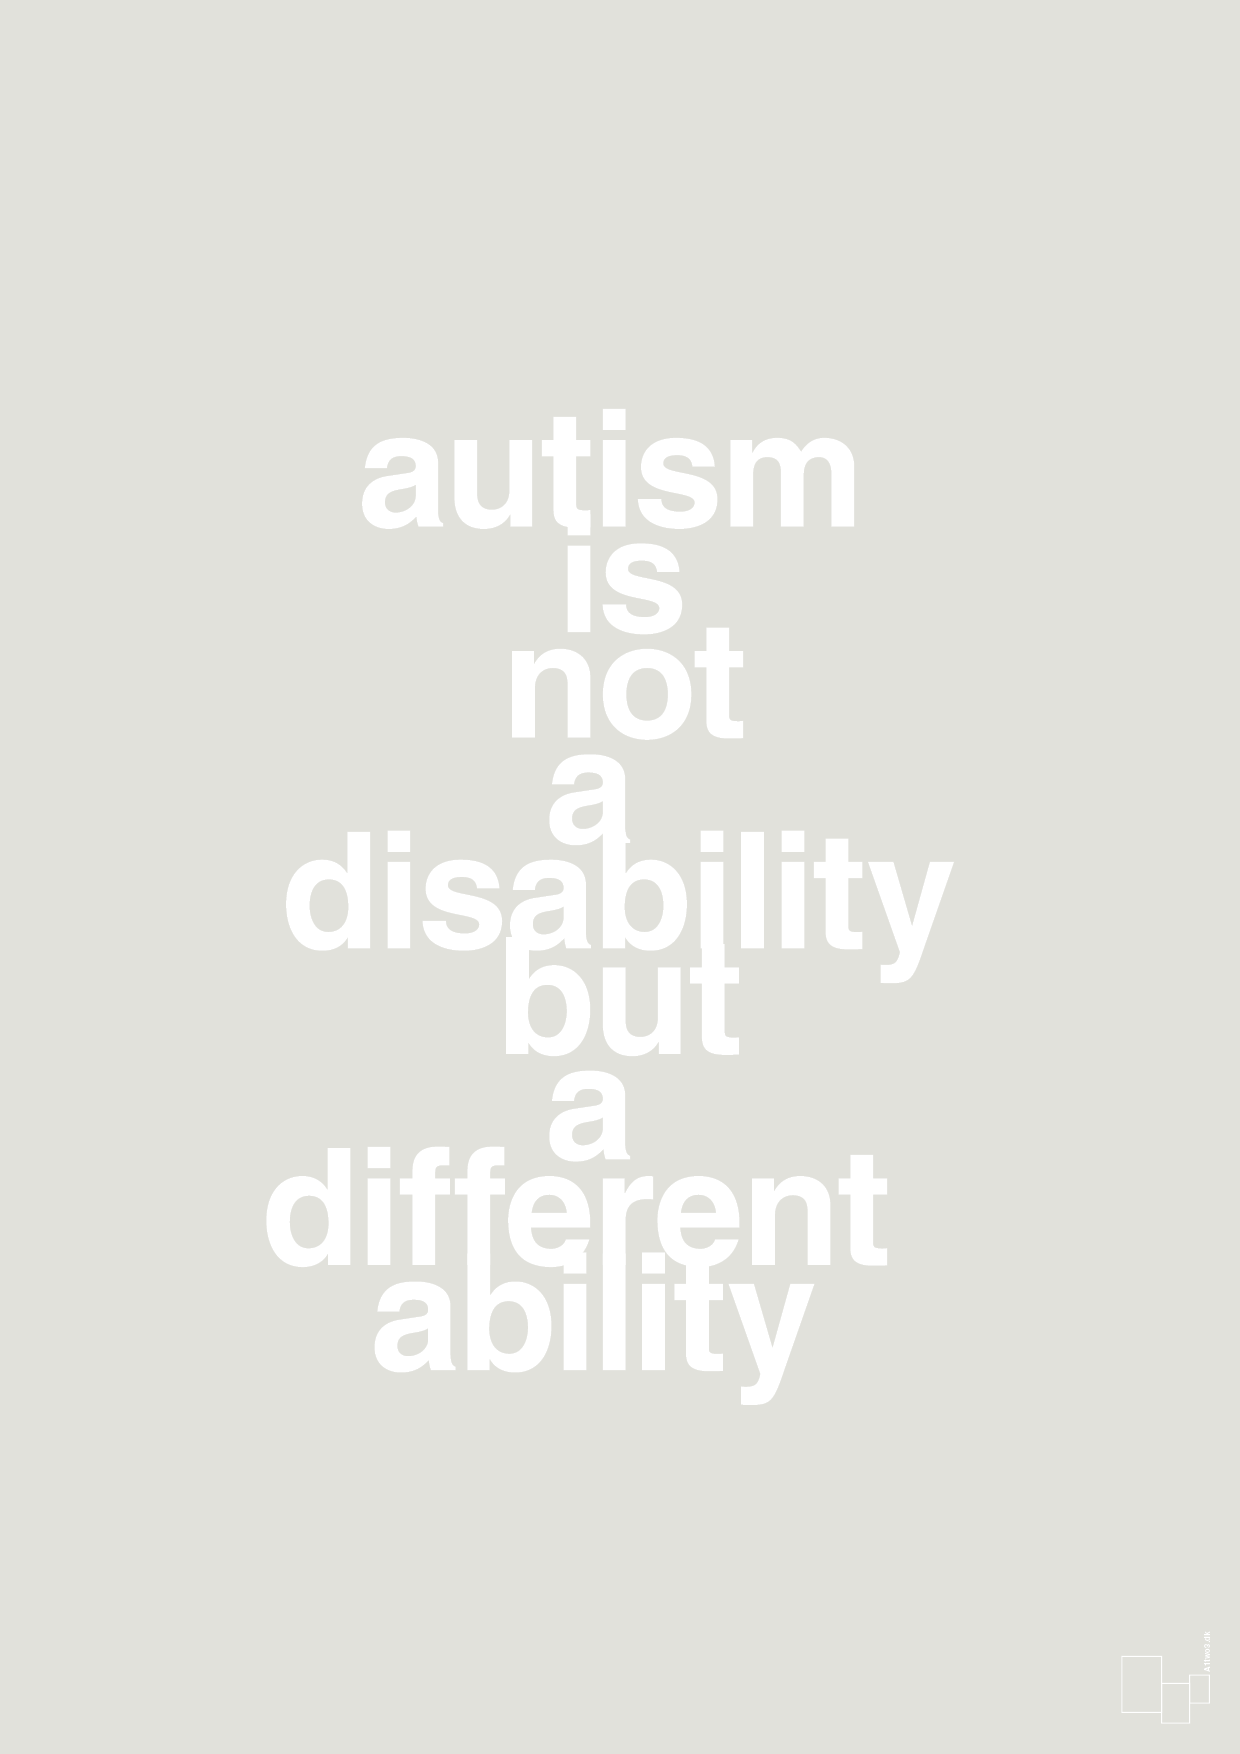 autism is not a disability but a different ability - Plakat med Samfund i Painters White